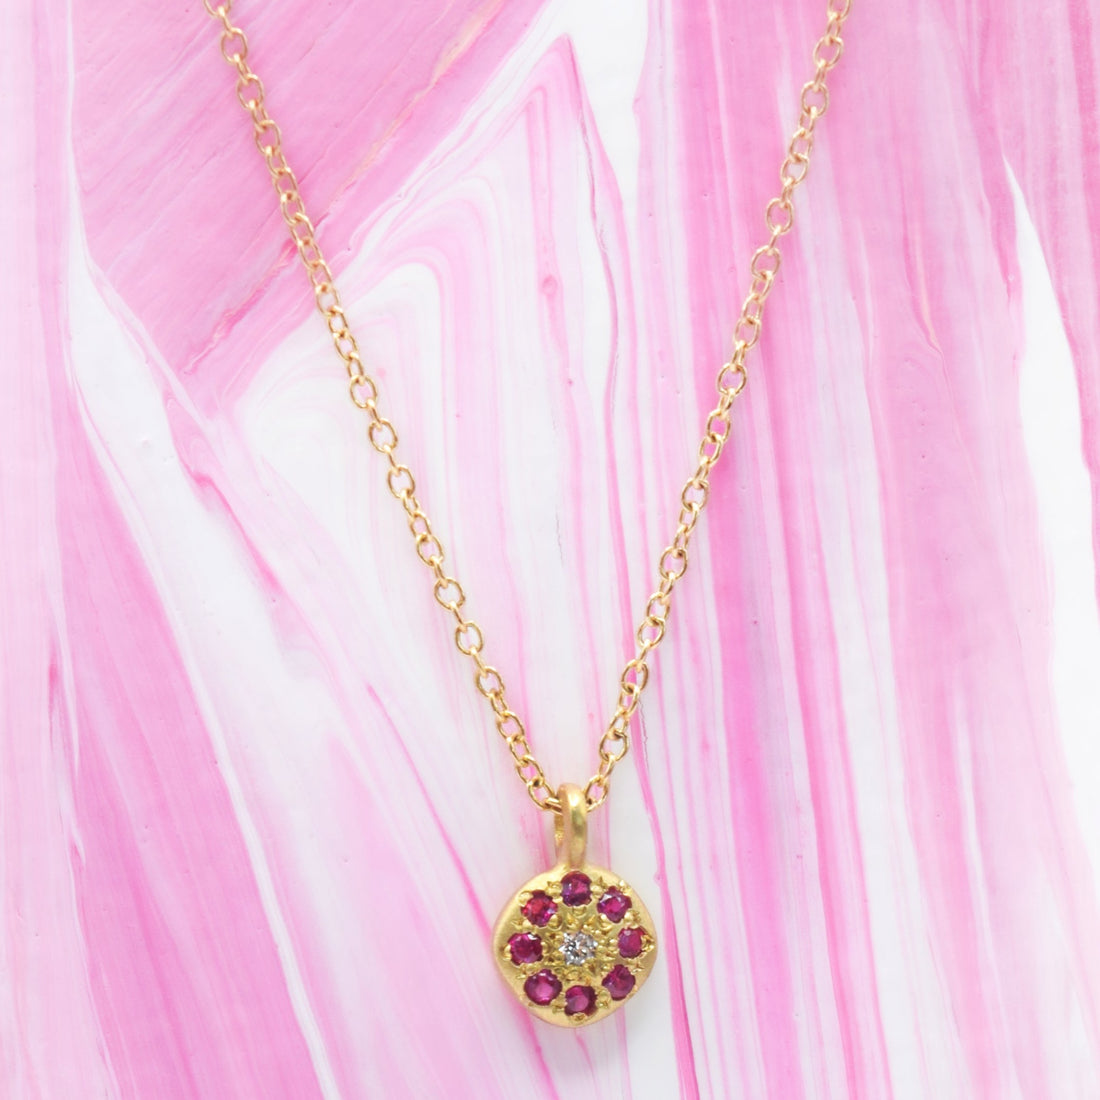 Adel Chefridi Small Gold Charm Necklace with Ruby Halo & Diamond Center